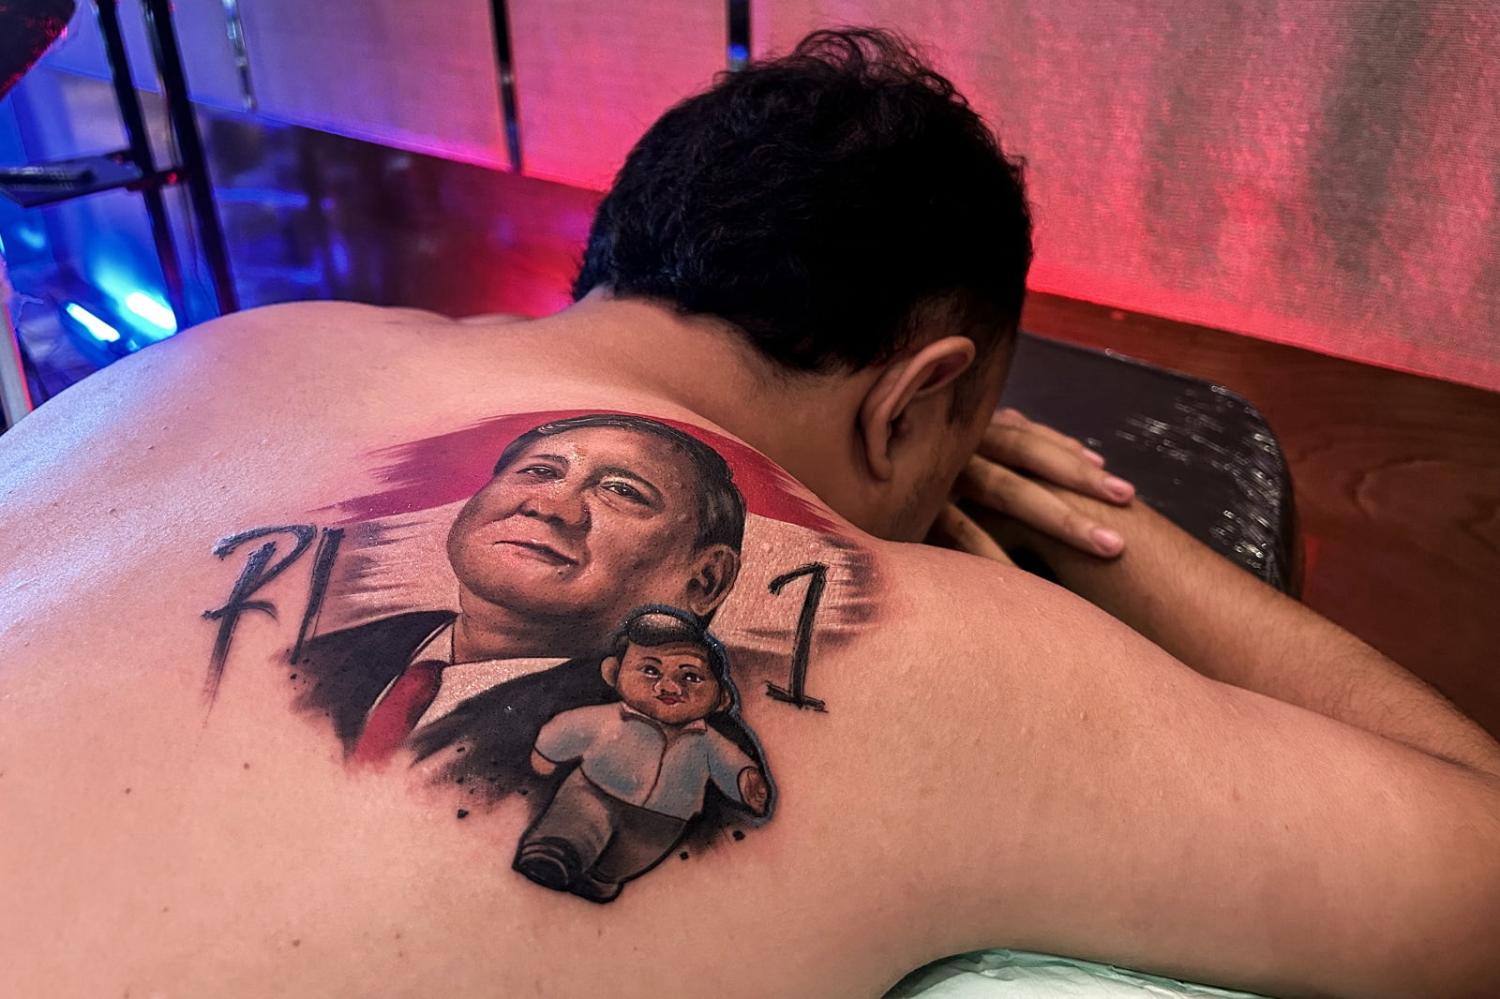 A supporter of Indonesia's Prabowo Subianto has his back tattooed with the now president's image ahead of the 11 January election (Bagus Saragih/AFP via Getty Images)